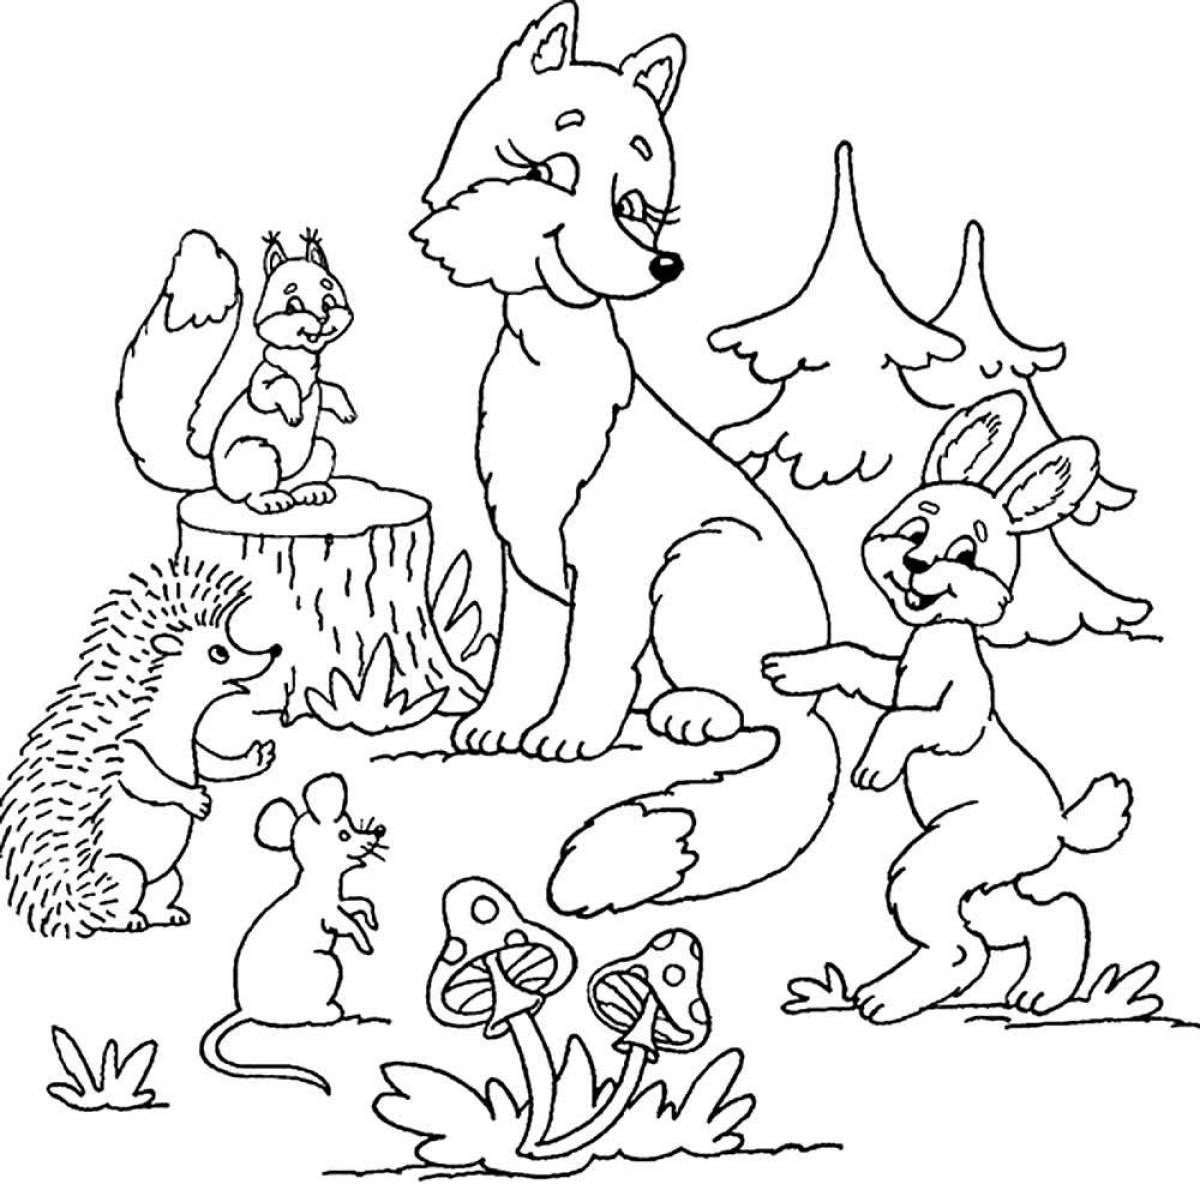 Fabulous wild animal coloring page